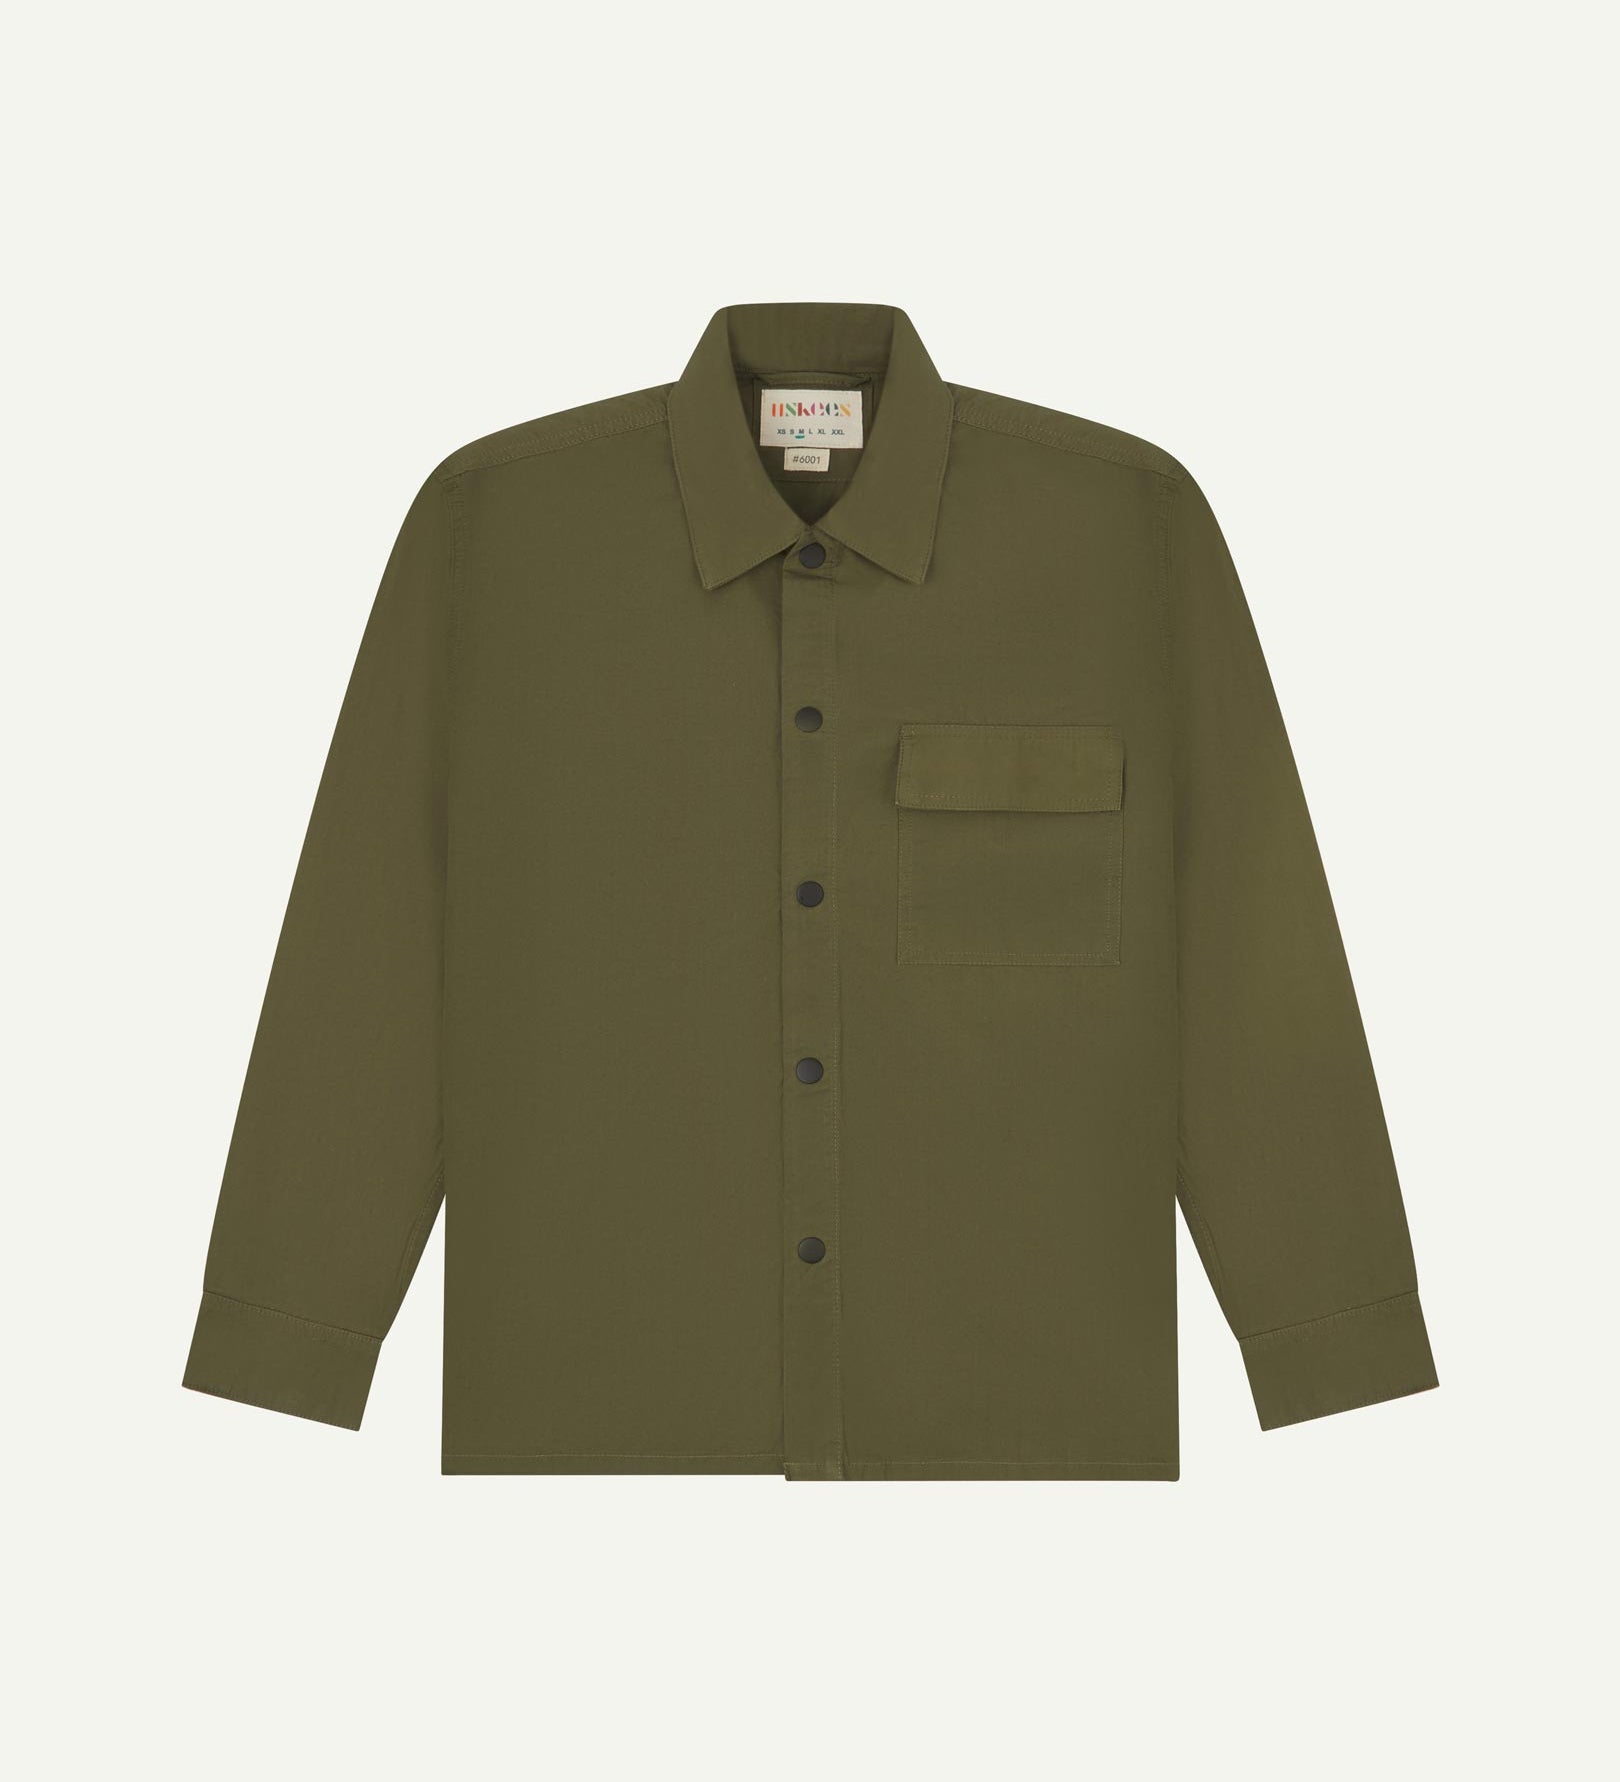 Front flat view of olive-green, lightweight overshirt. Clear view of the press studs, breast pocket and Uskees branding label.